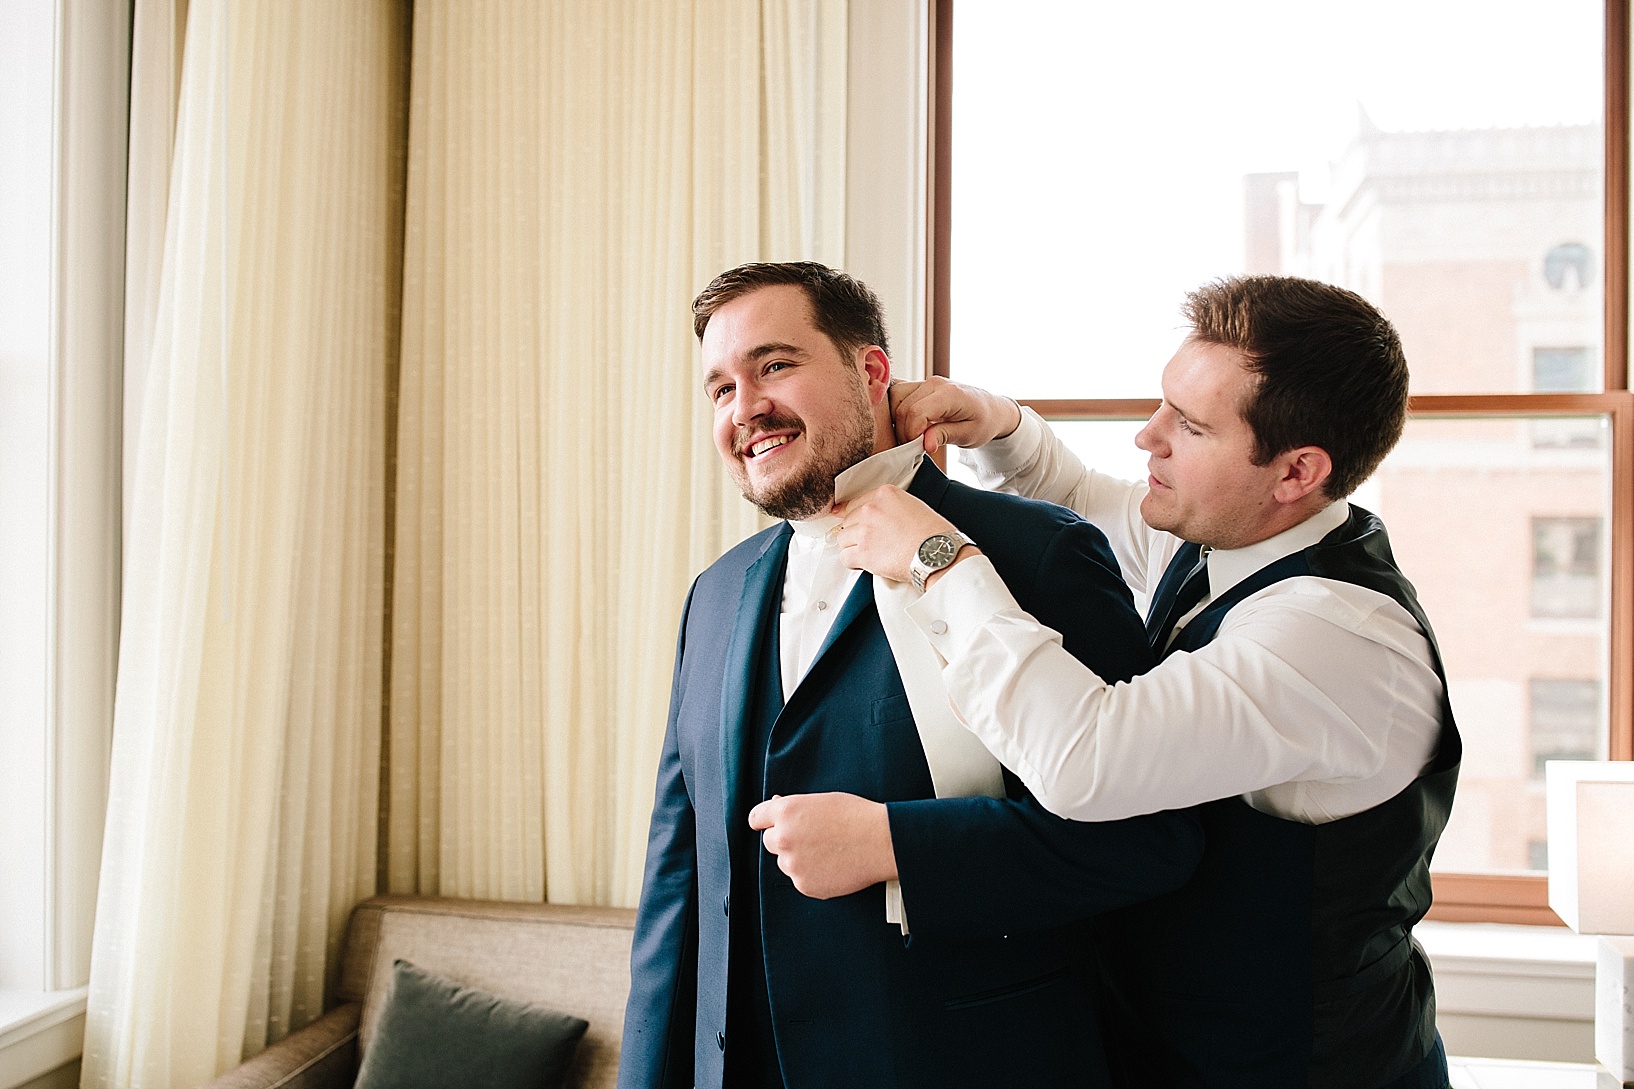 Double Tree Hotel Youngstown OH Wedding photos